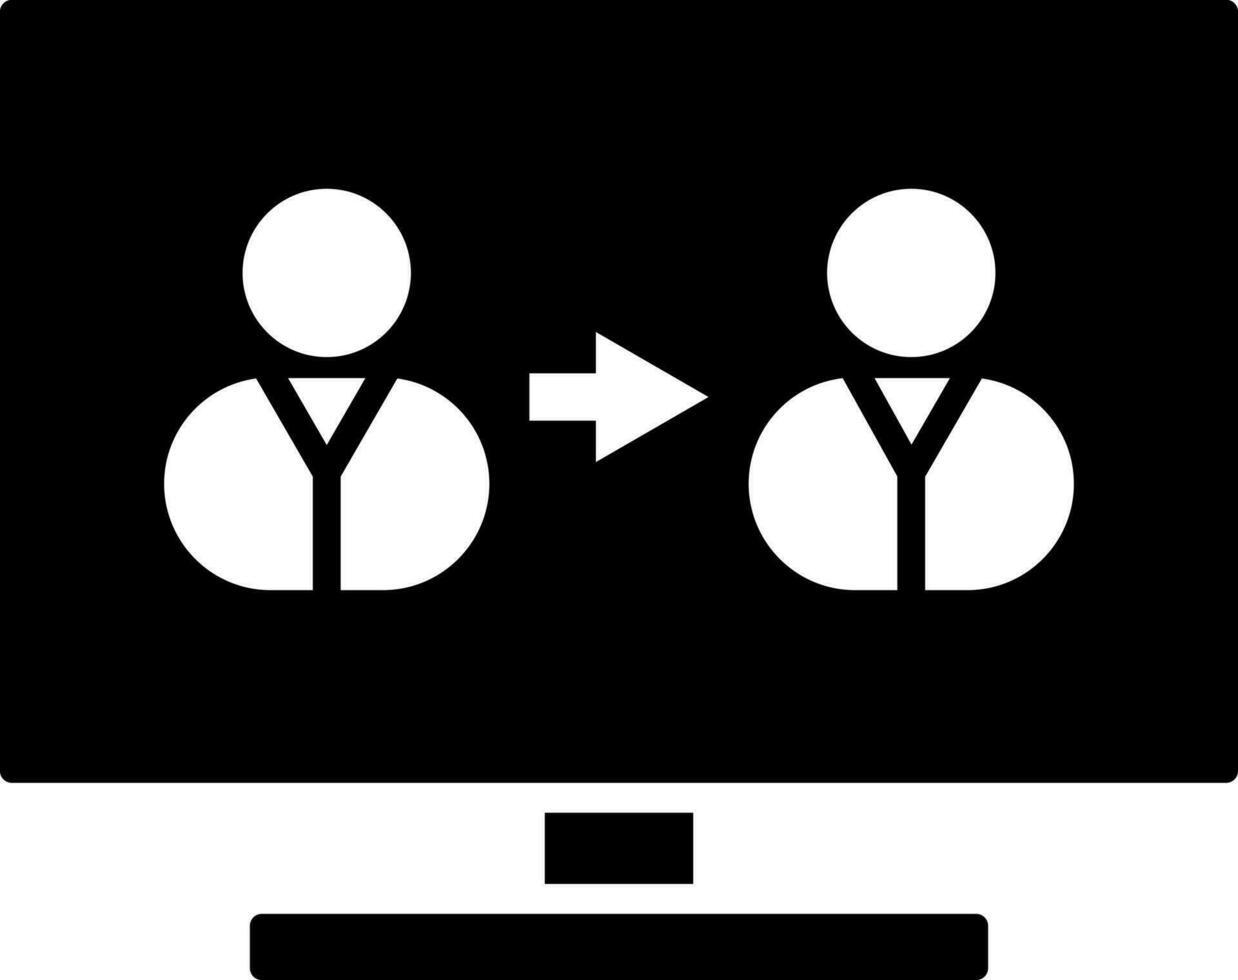 Online user connection from computer icon. vector